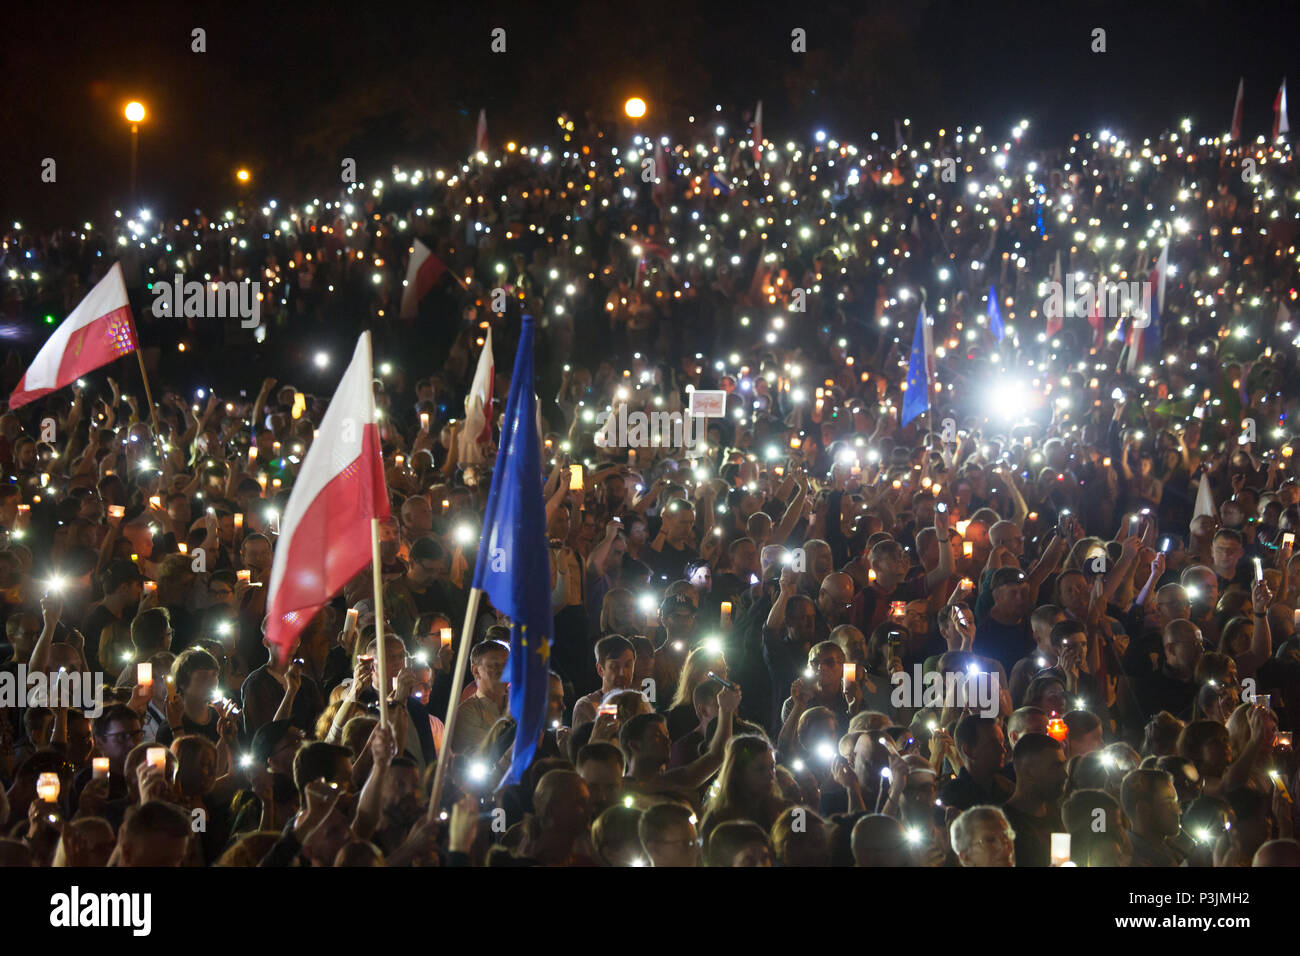 Demonstration against the equalization of justice by the PIS government under the motto LANCUCH SWIATLA (fairy lights) Stock Photo